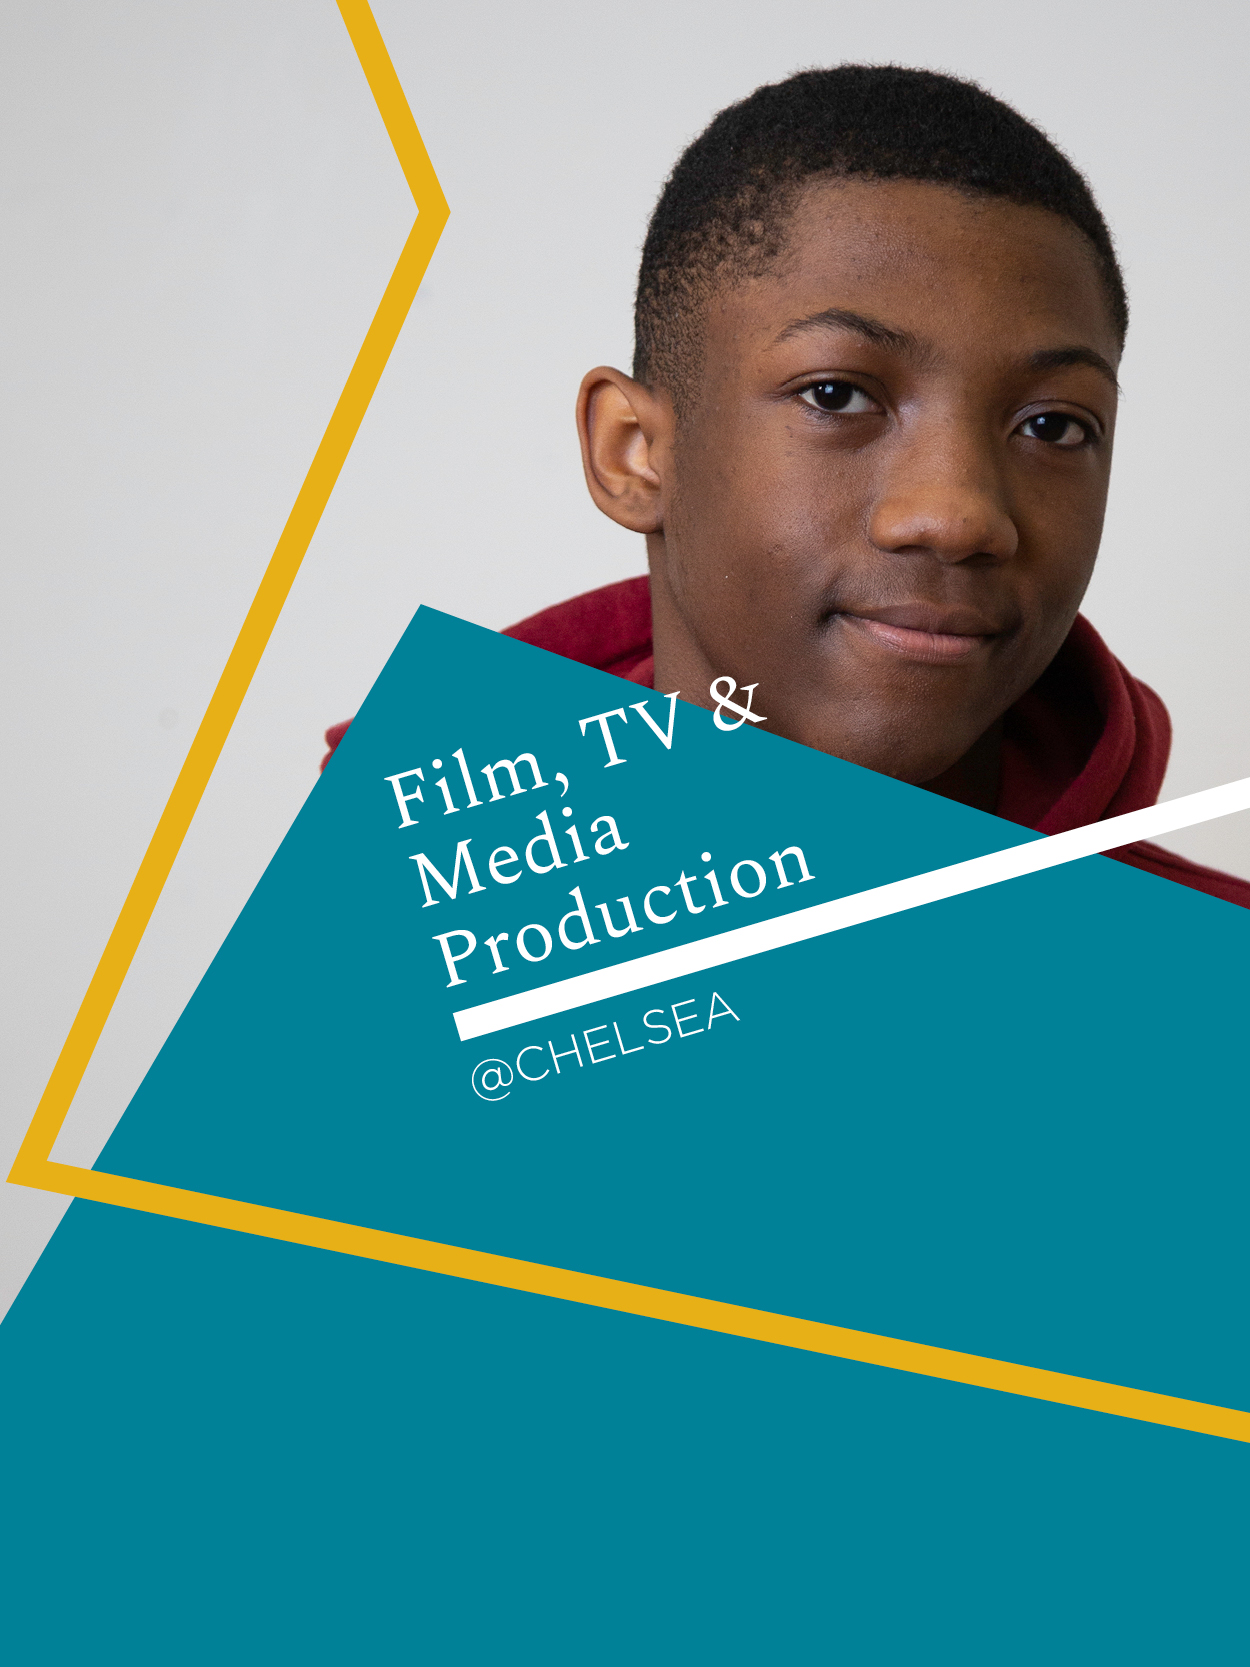 Film, TV and Media Production